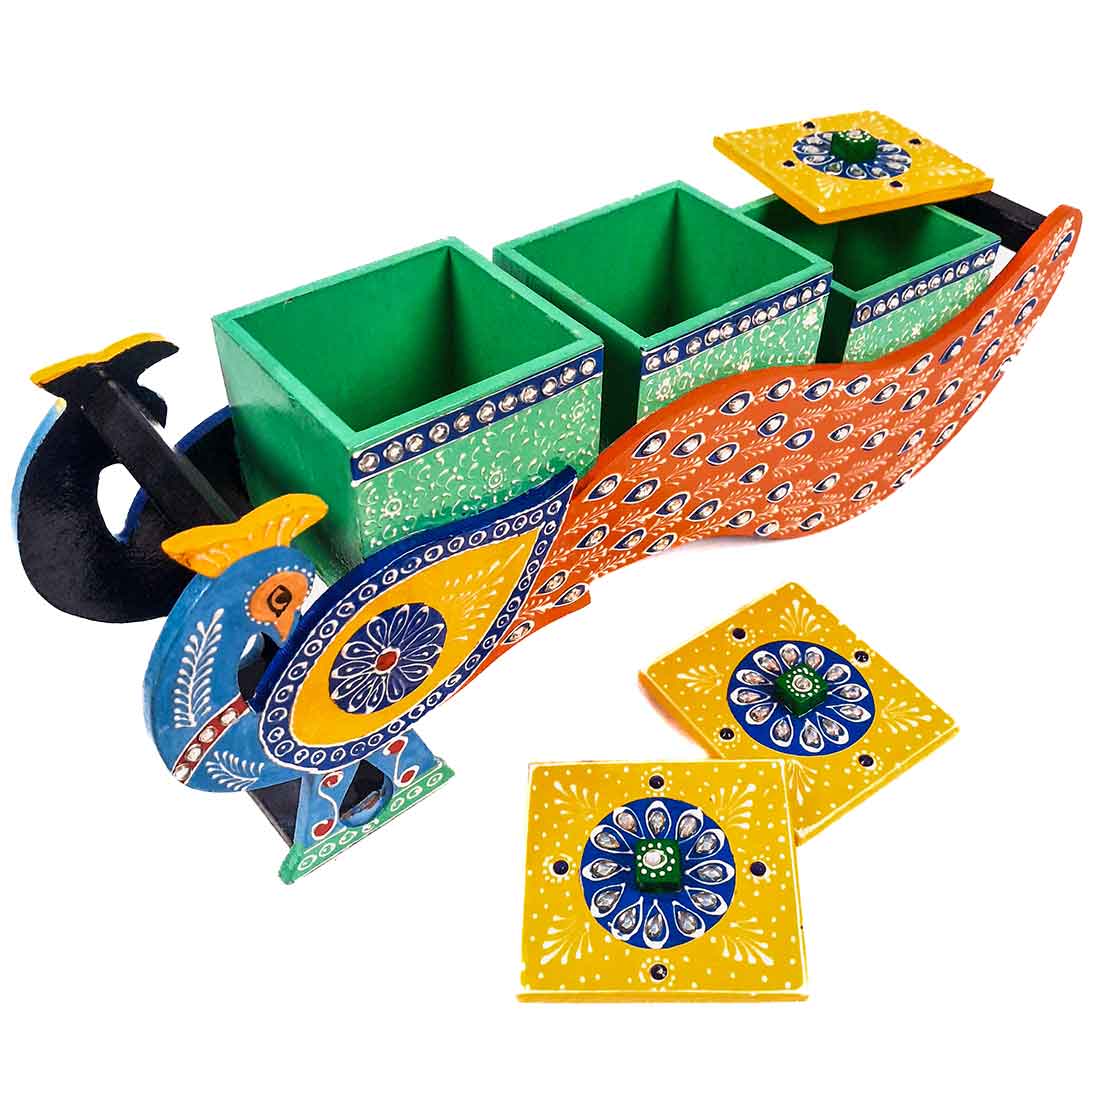 Dry Fruit Box with Lid  - Peacock Design - For Serving & Dining Table Decor - ApkaMart